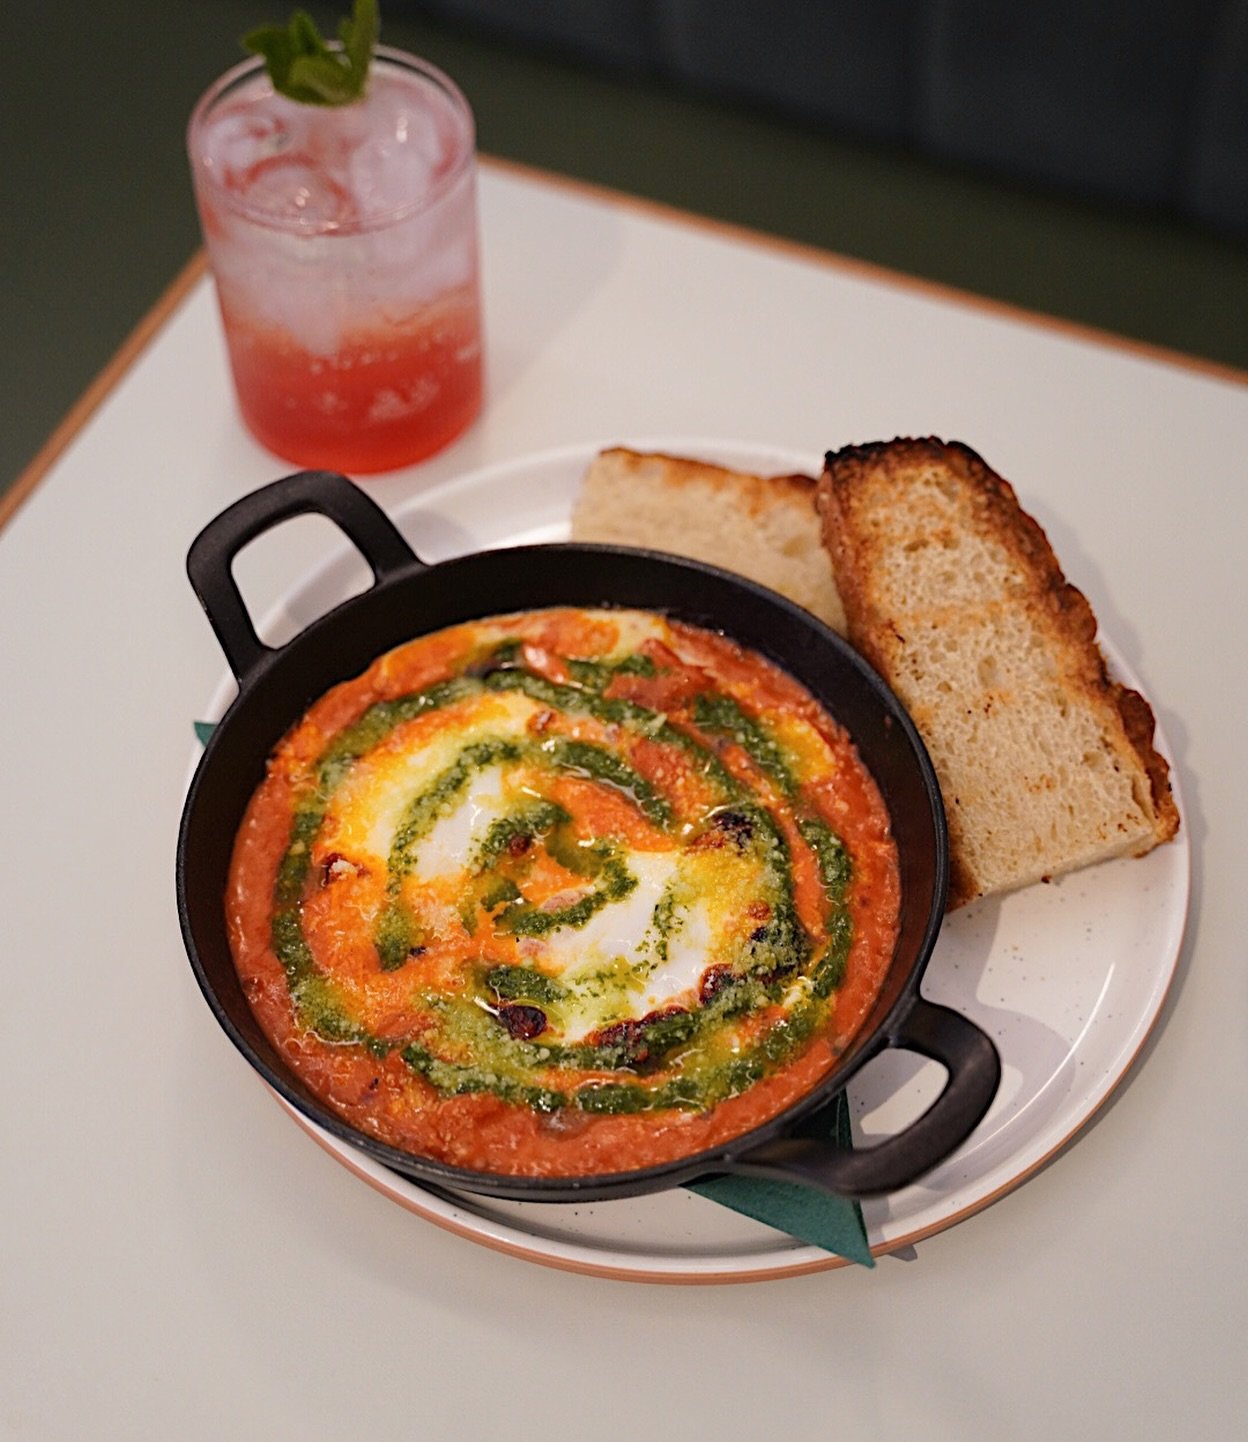 Neighbourhood Baked Eggs
Eggs baked in housemade vodka sauce - a rich and creamy vodka marinara with a gentle chilli kick, parmesan &amp; basil oil, served with @benchmark_bread focaccia